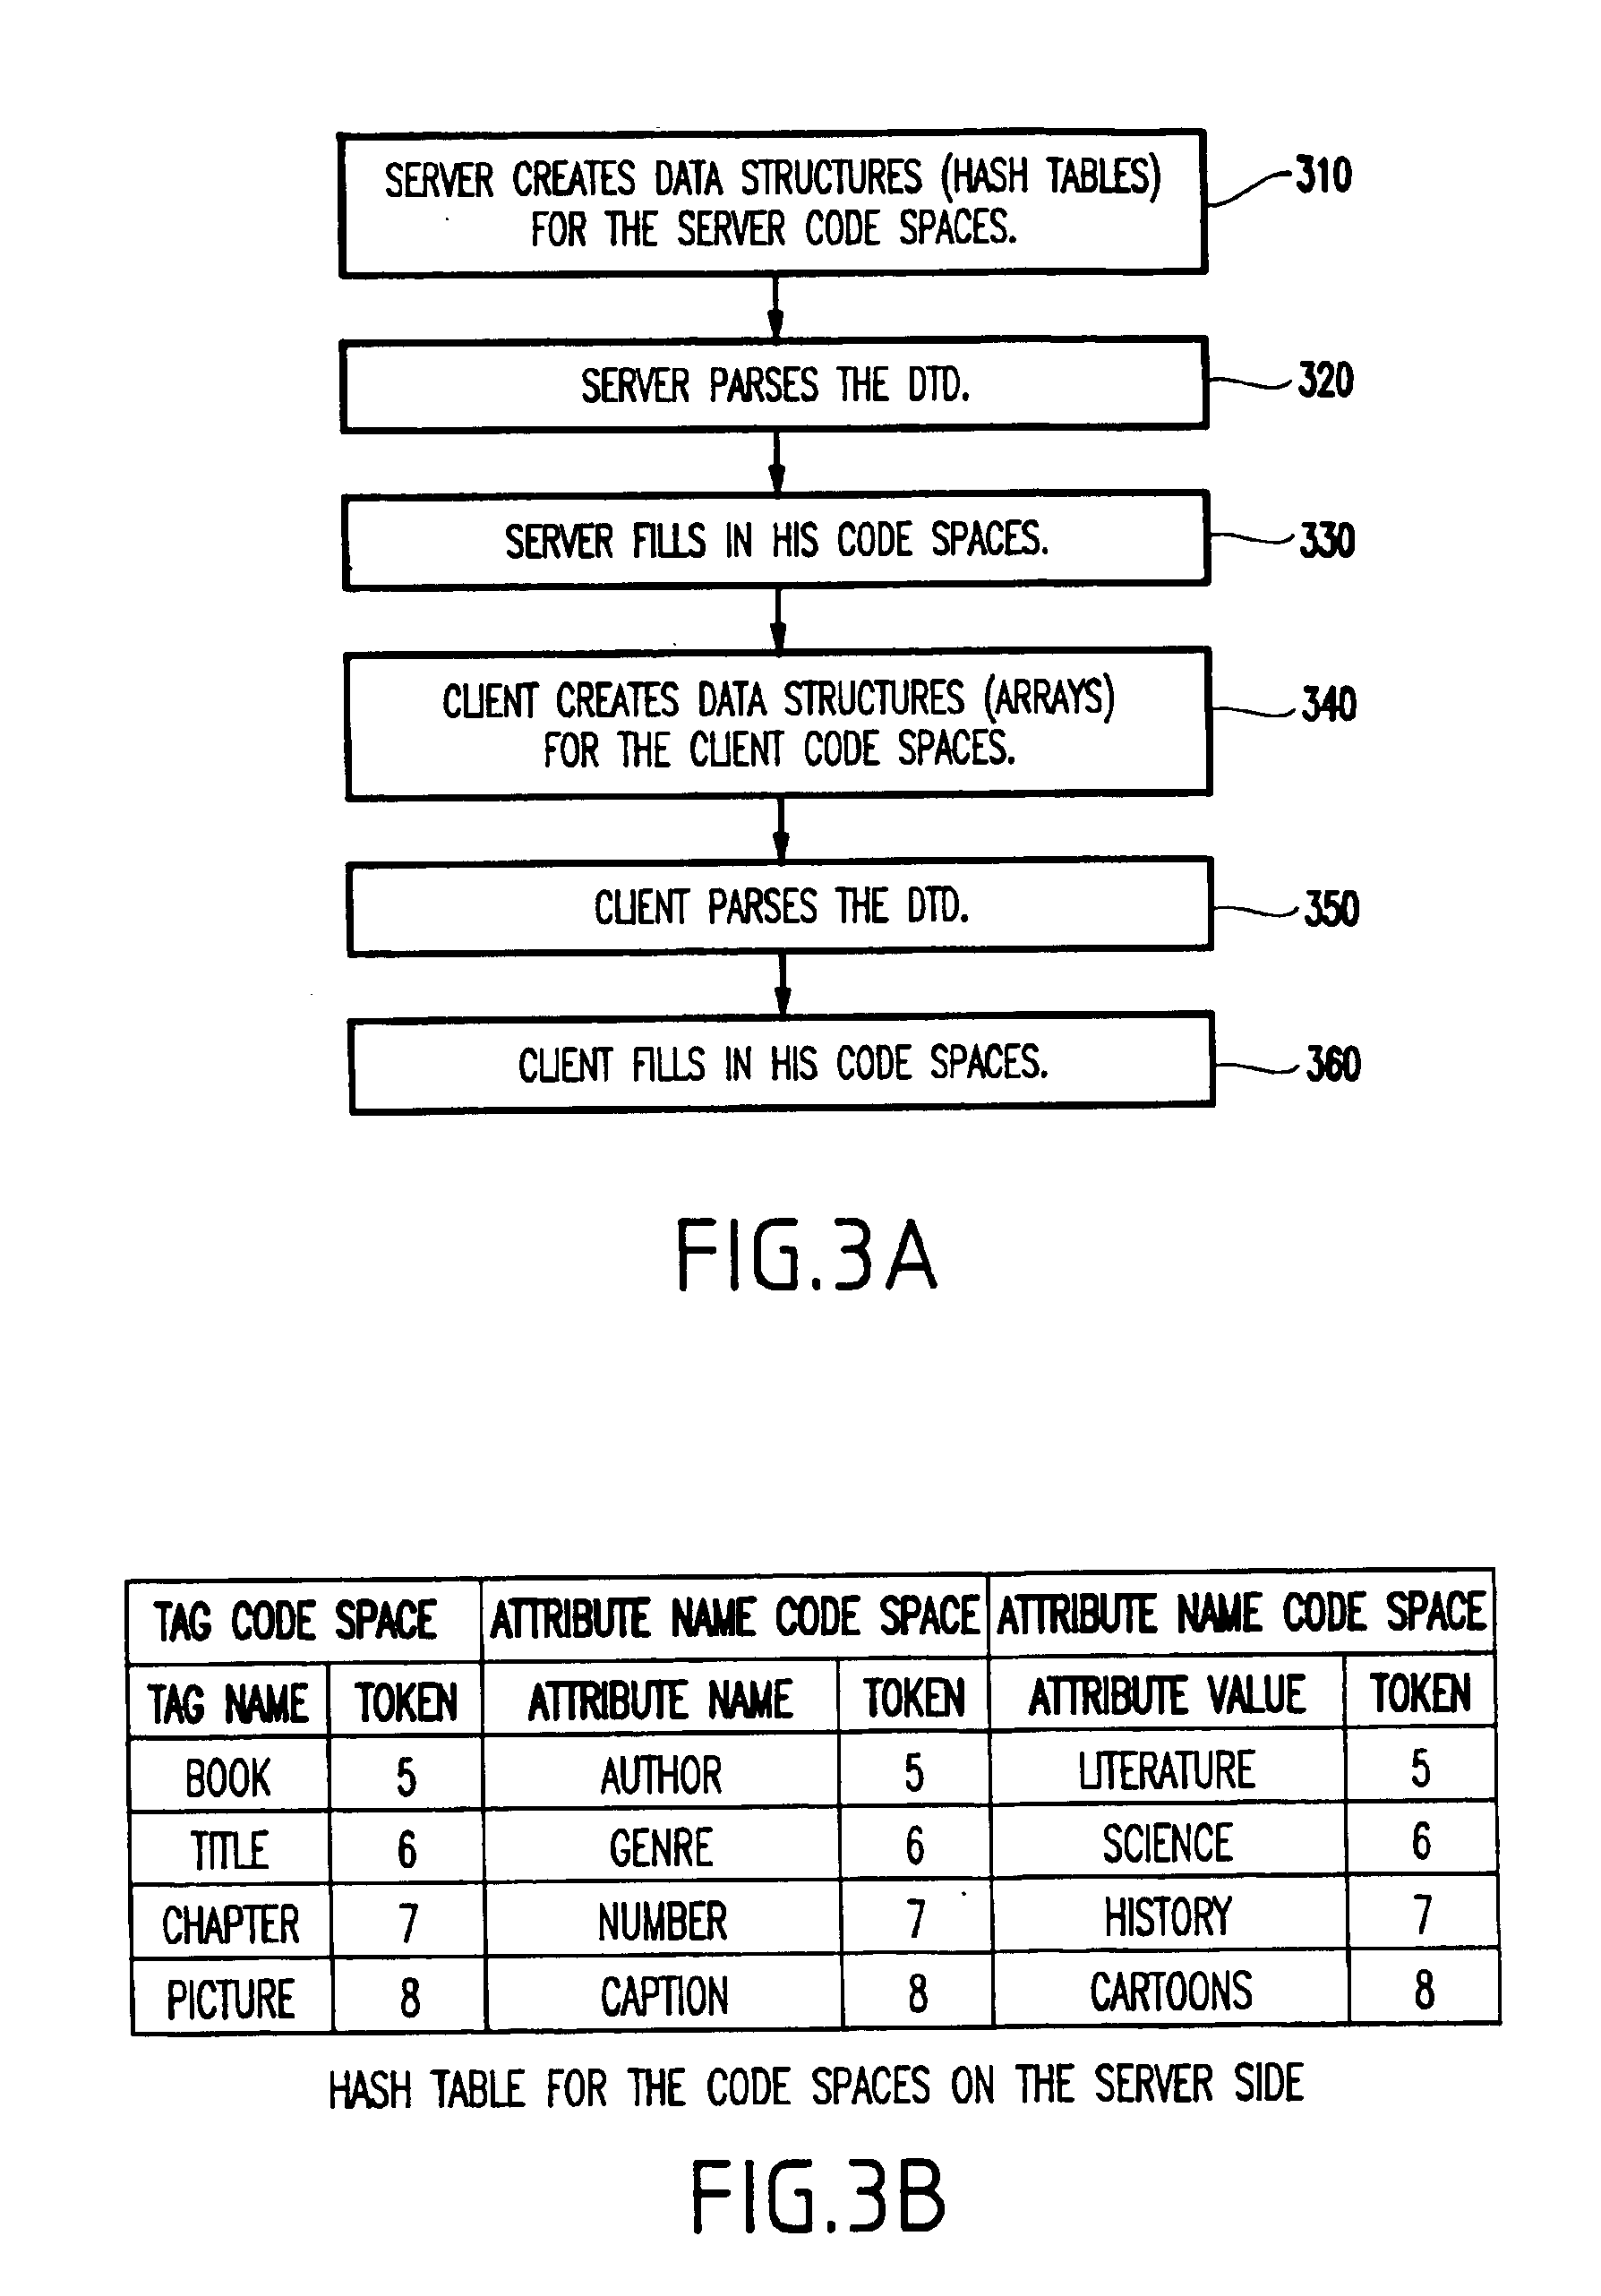 System and method for schema-driven compression of extensible mark-up language (XML) documents